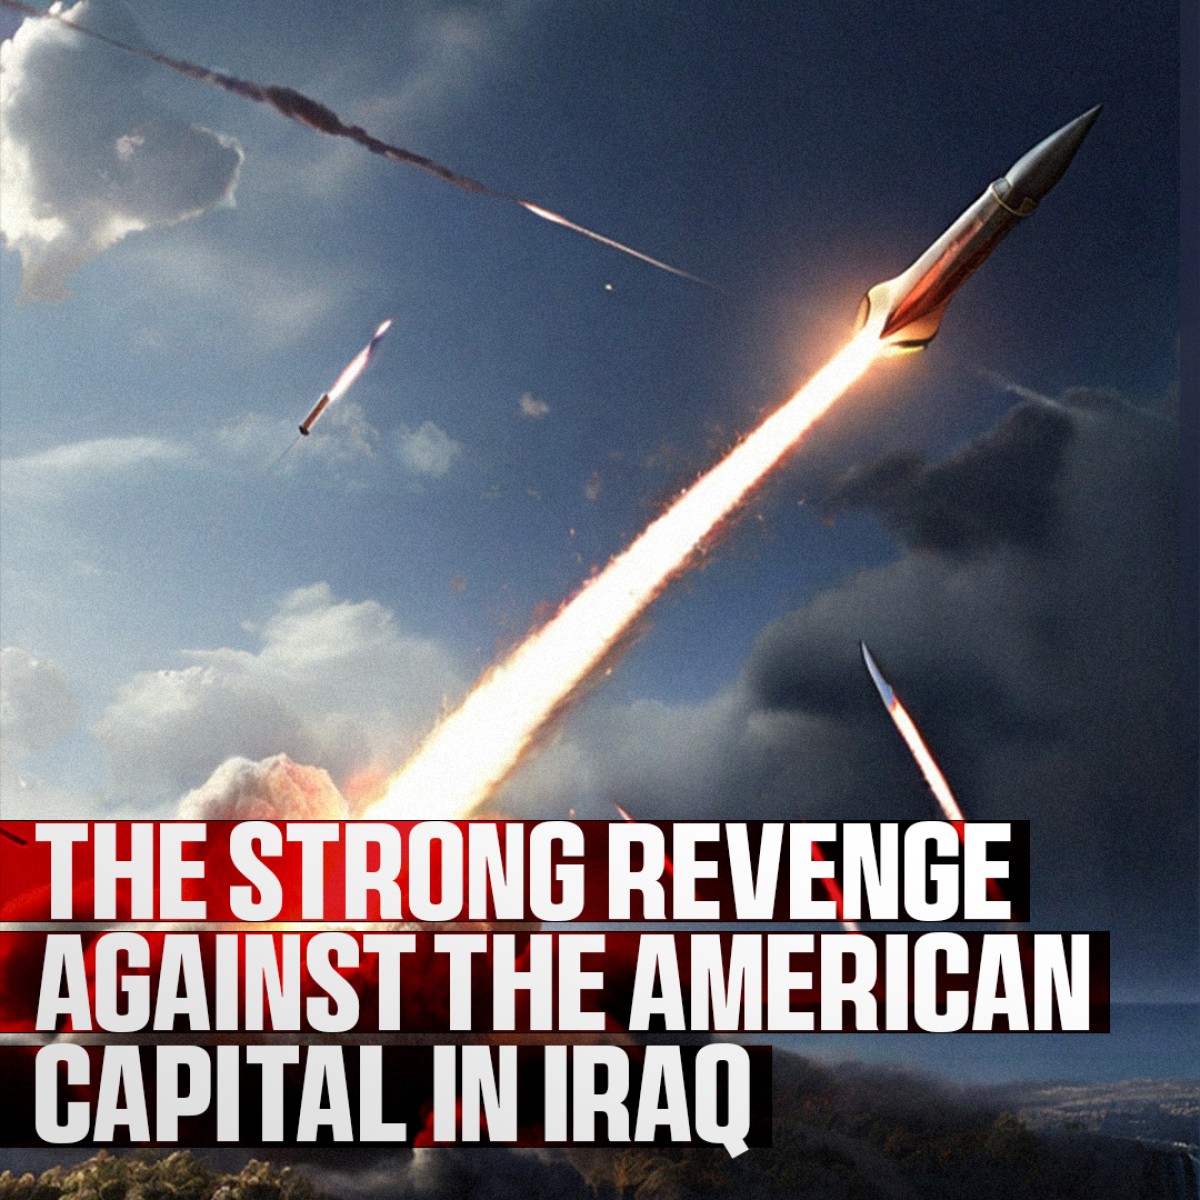 THE STRONG REVENGE AGAINST THE AMERICAN CAPITAL IN IRAQ